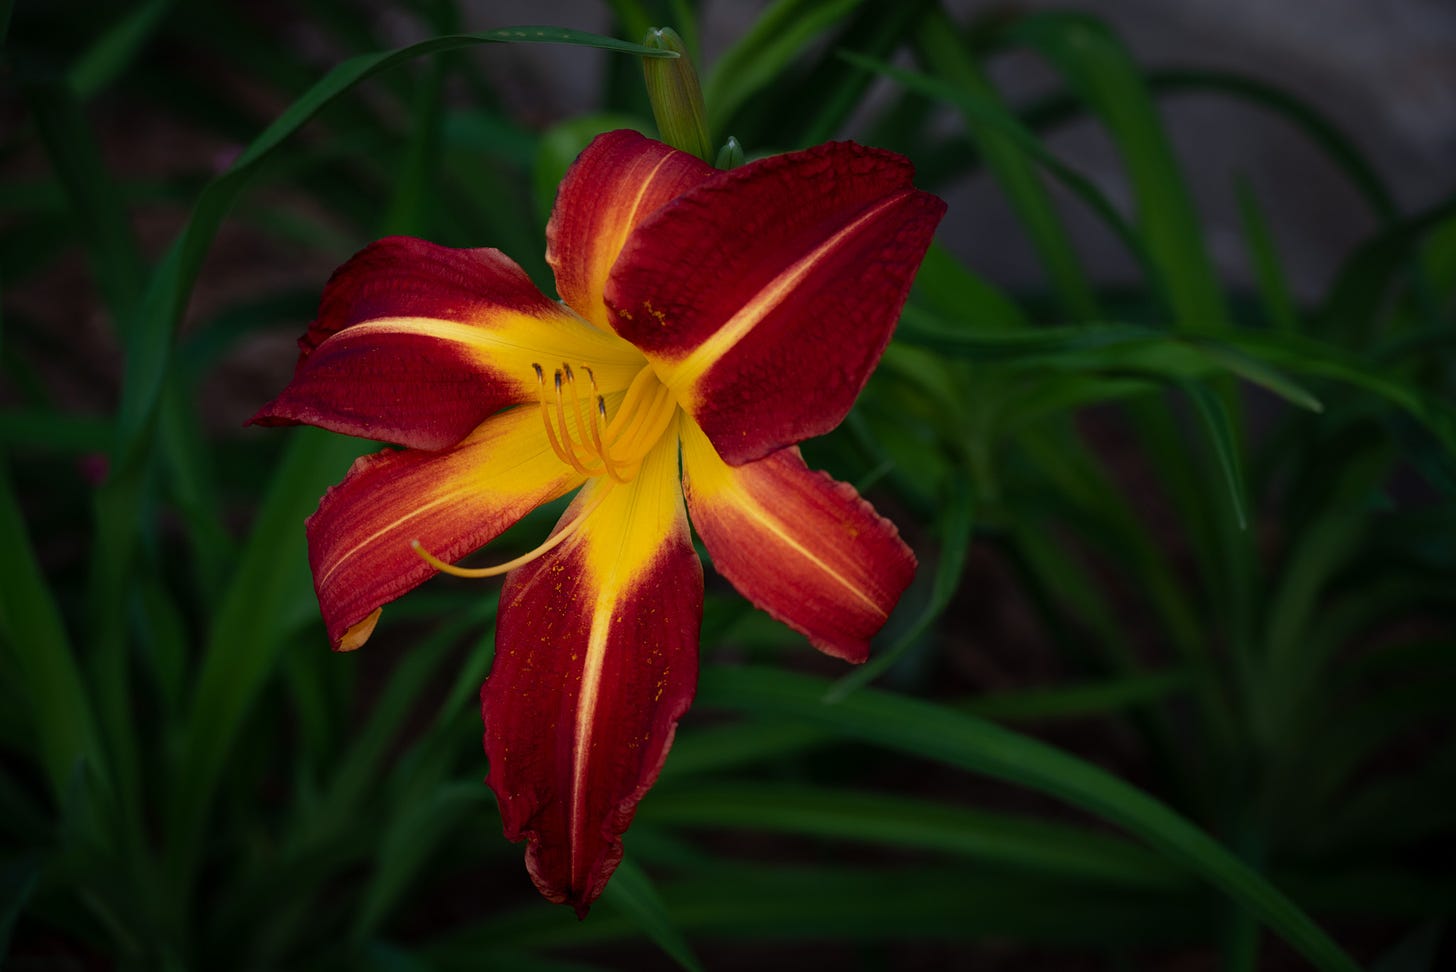 A single deep red daylily with a yellow center and stripe in each petal